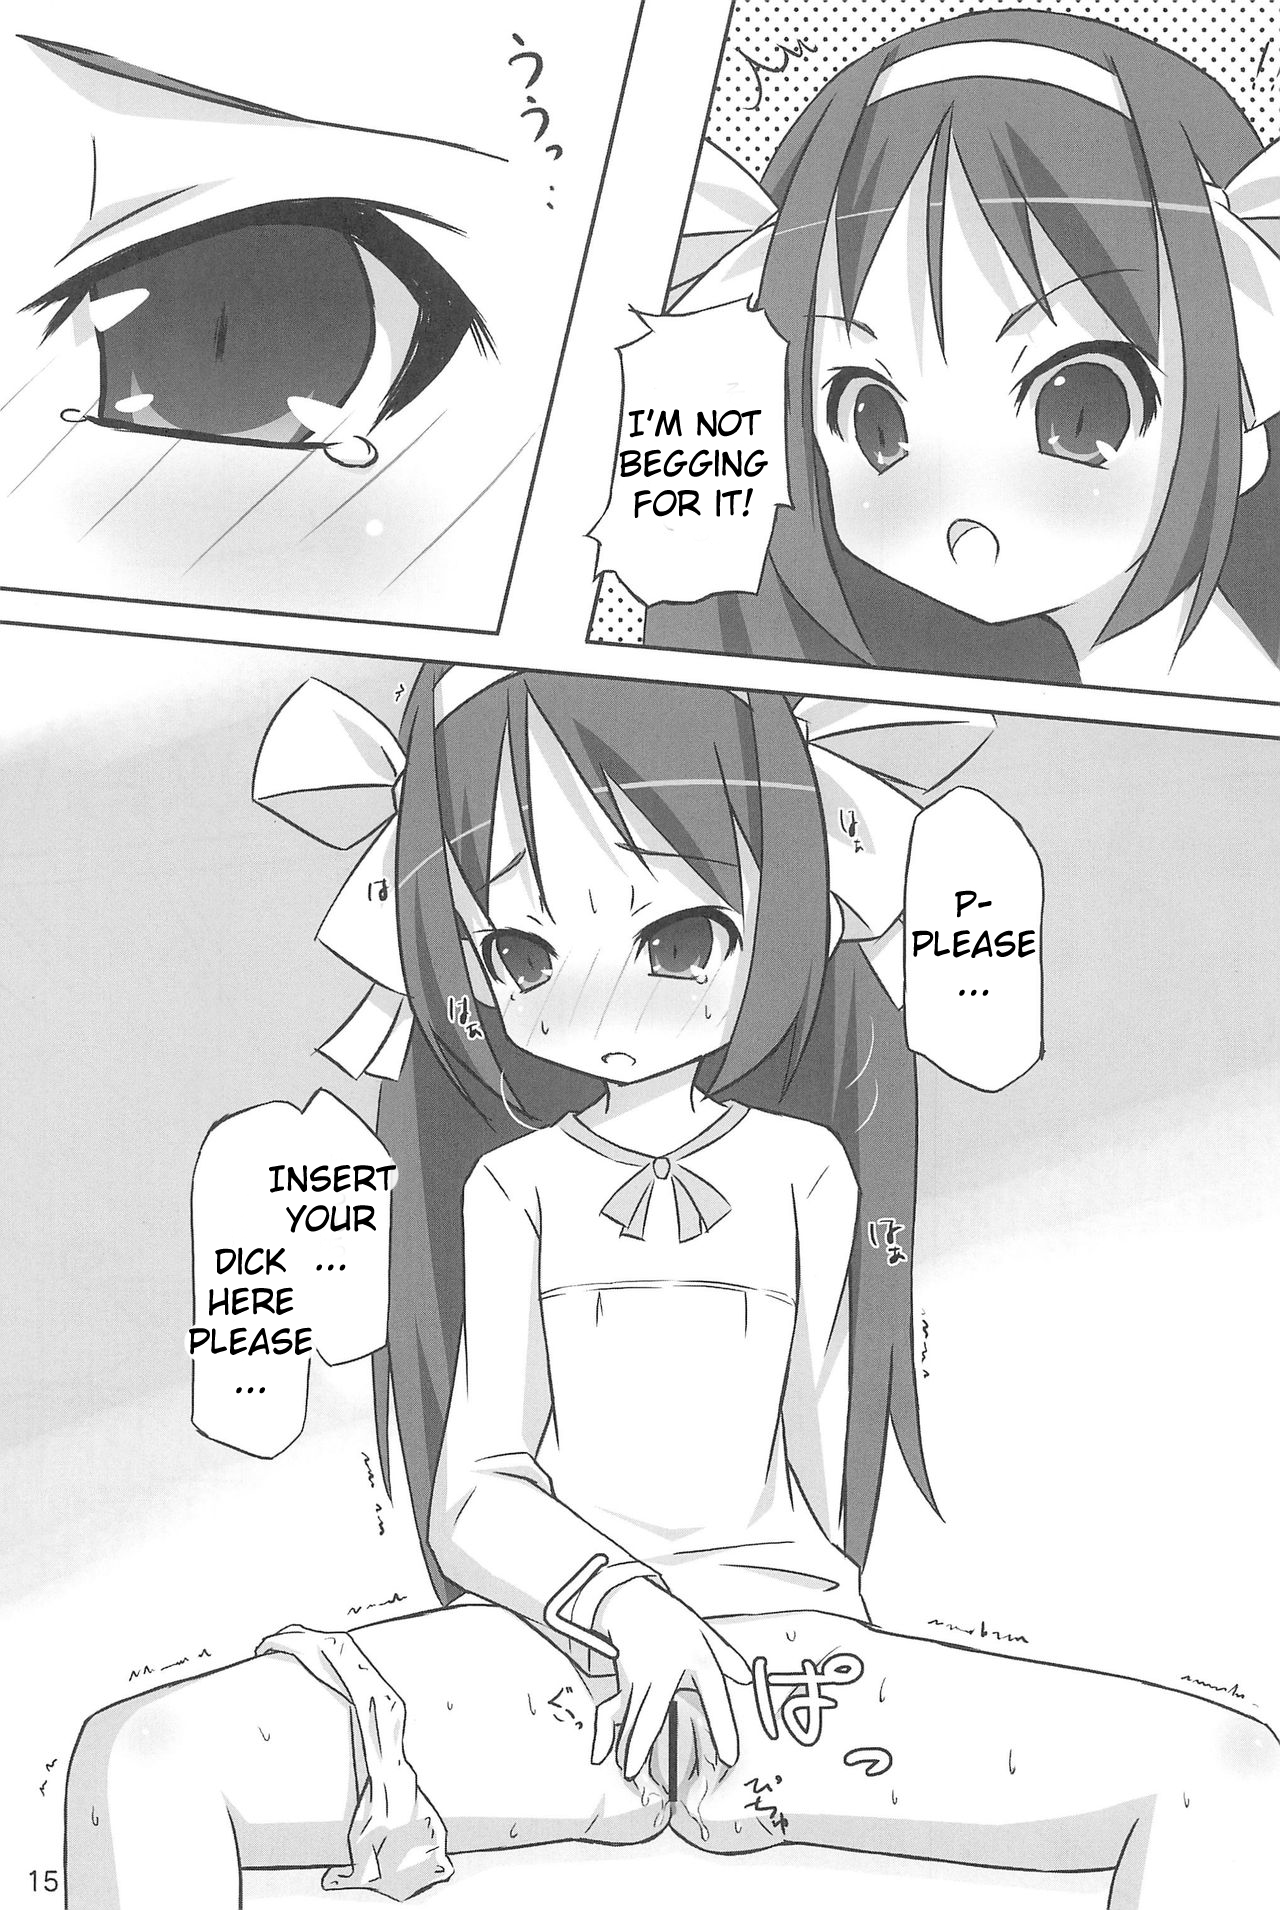 Tiny Angel Collection 3 hentai manga picture 15